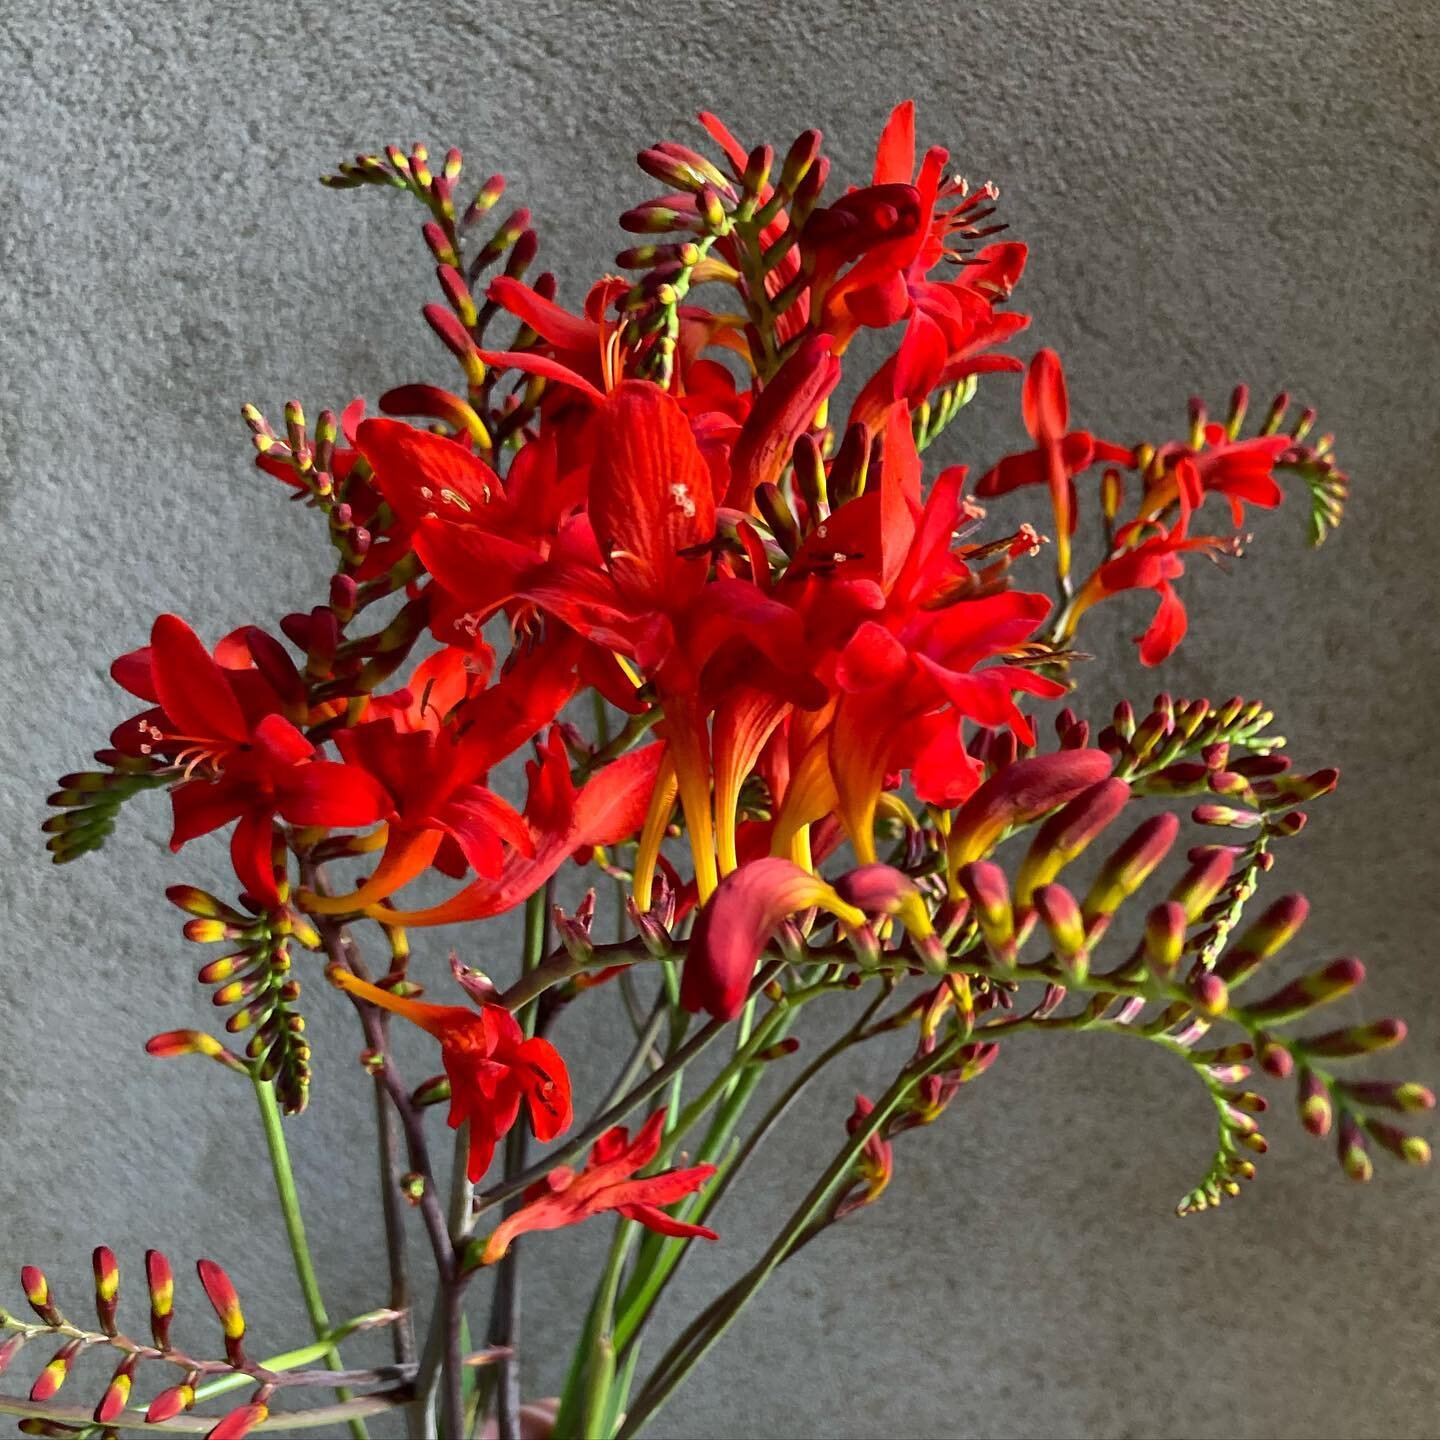 Crocosmia &lsquo;Lucifer&rsquo; &hellip; it&rsquo;s that hot out there people!!! Wishing everyone a fabulous weekend and those with little ones a wonderful summer holidays. I&rsquo;m off for some much needed R&amp;R with my lovely family next week so